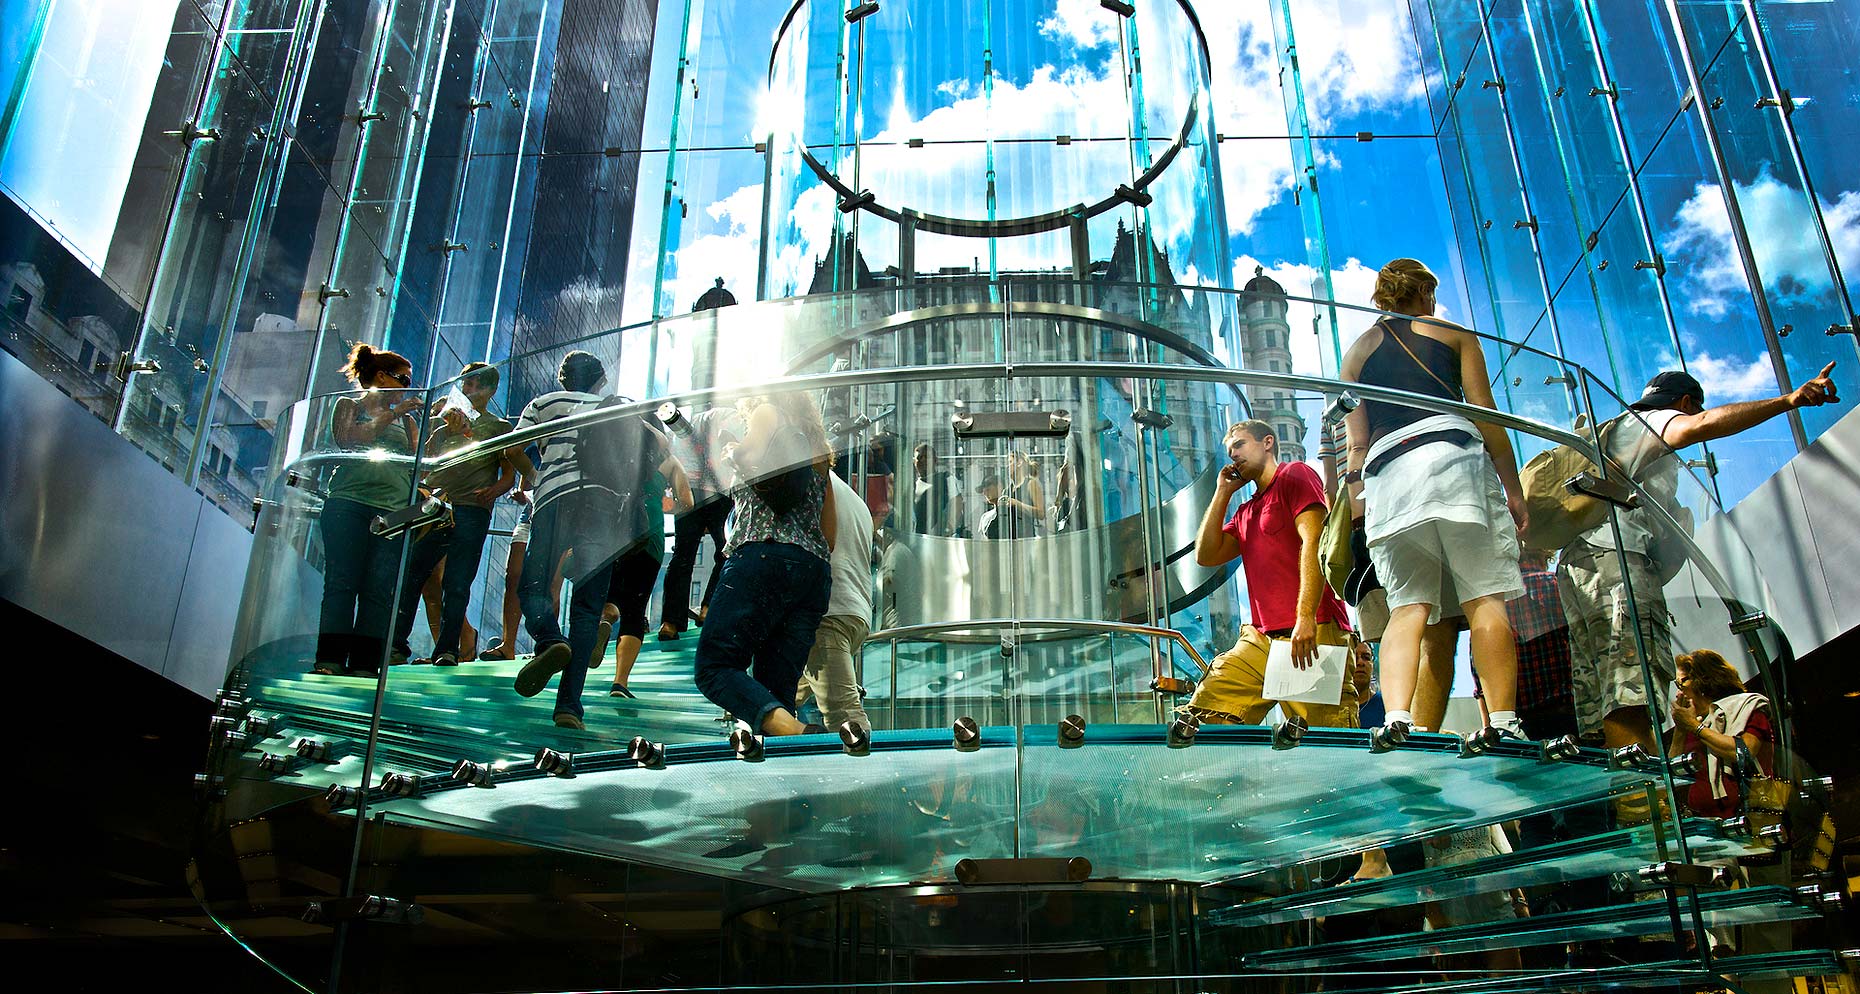 Glass stairwell of Apple Store on 5th ave NYC with customers. 